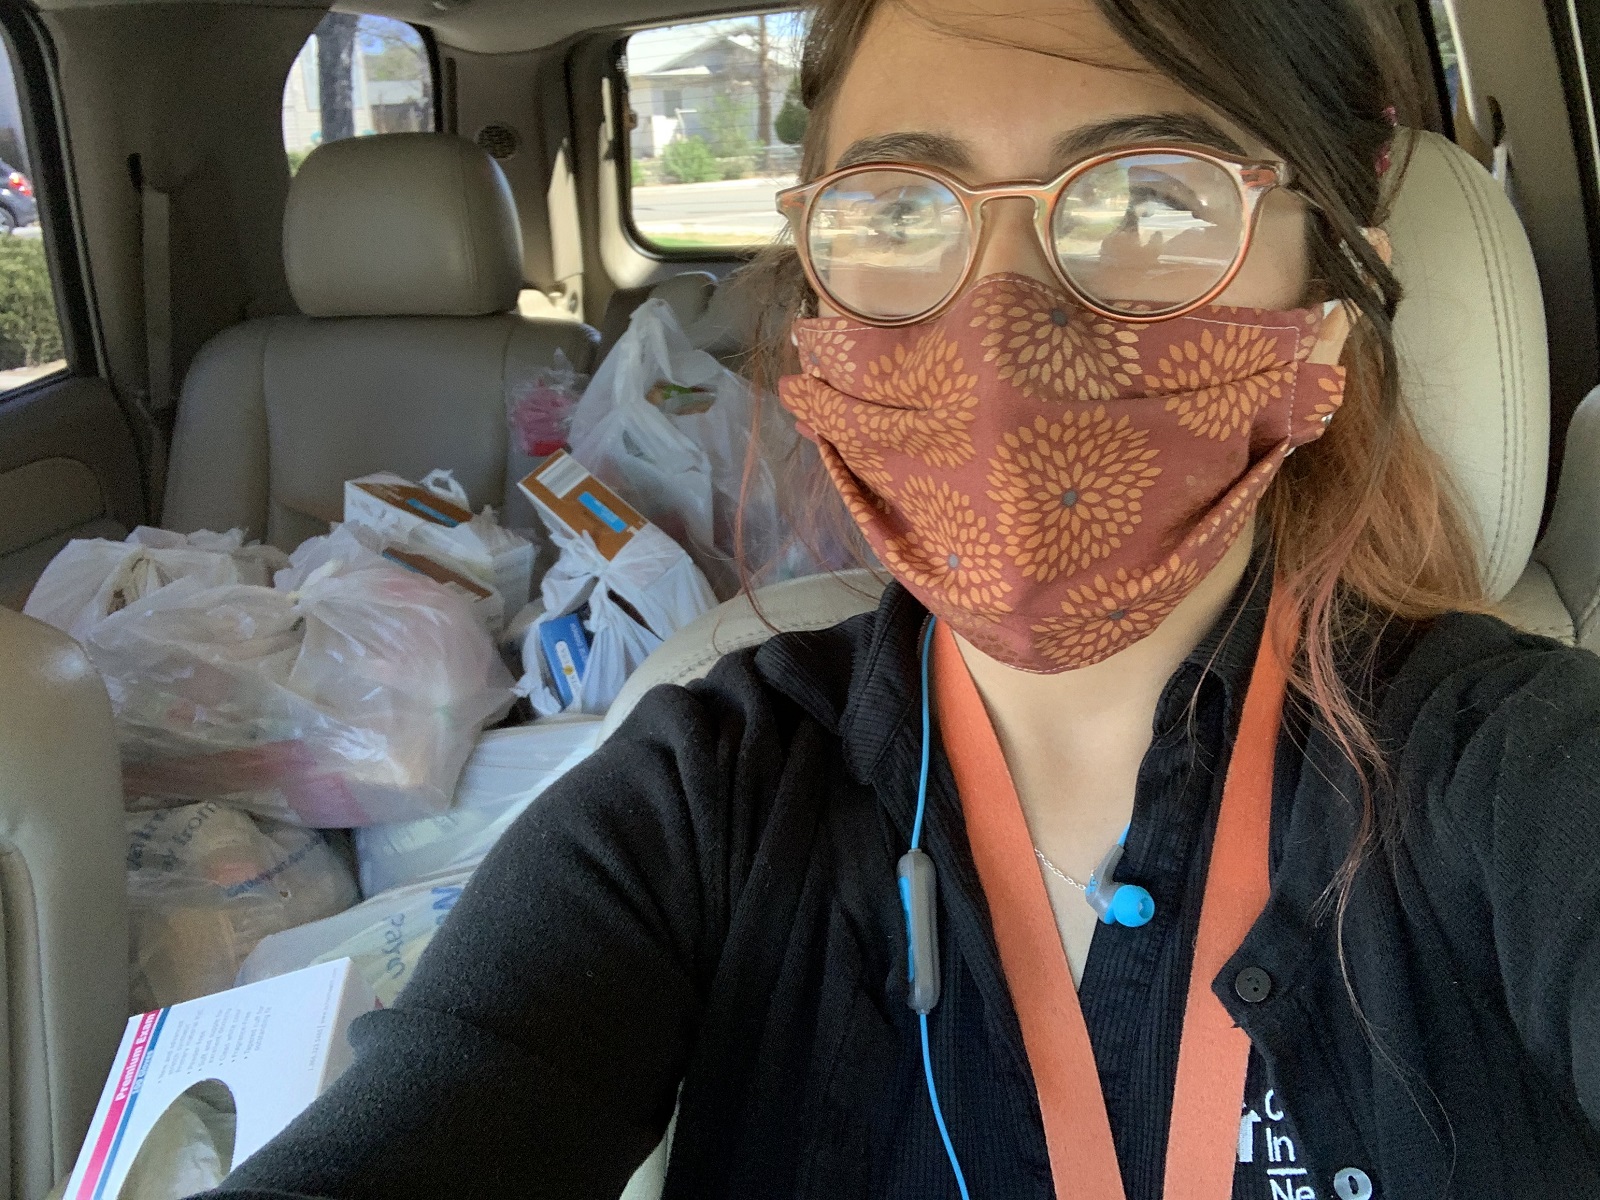 Carolina Juárez runs the Glenn Duncan Elementary food pantry. When COVID-19 it, she started delivering food to the homes of families in need. This self portrait shows a masked Carolina in her car, with bags of food piled in the back seat.